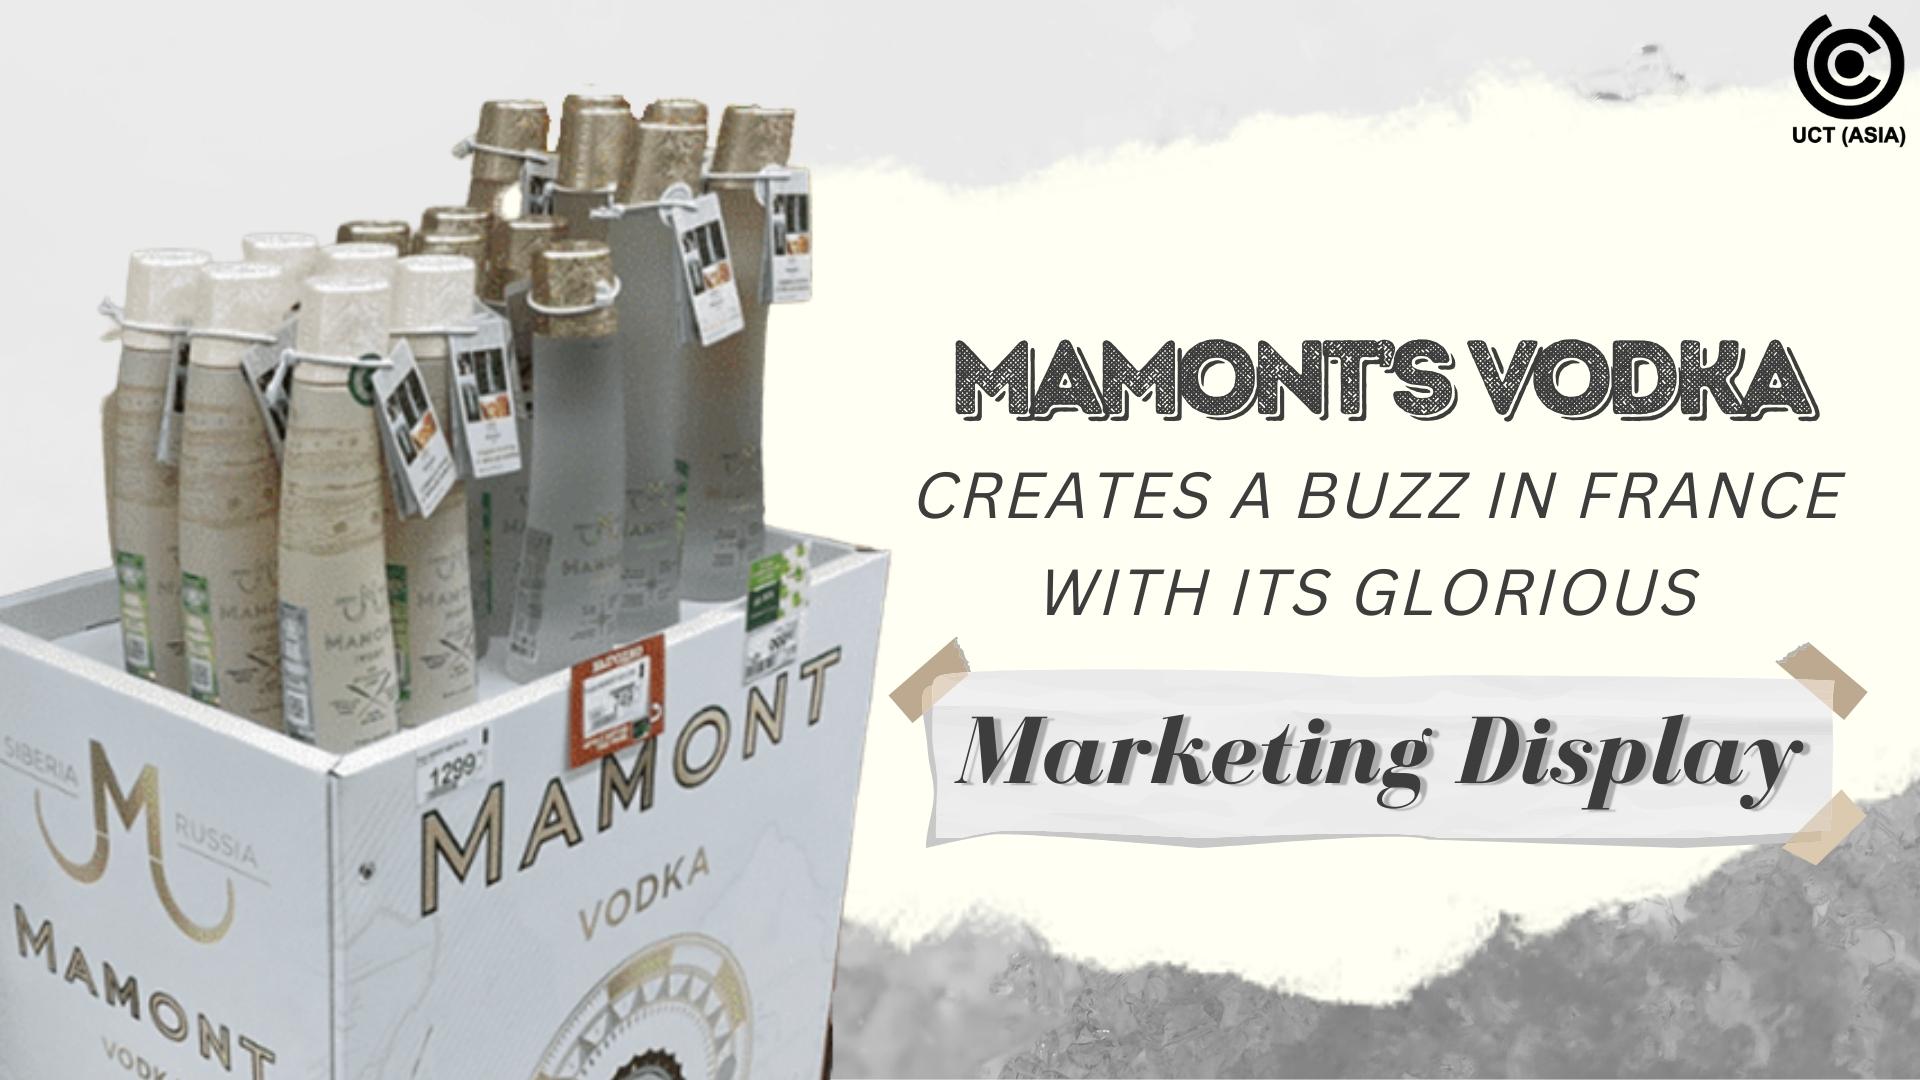 Mamont’s Vodka Creates A Buzz In France With Its Glorious Marketing Display